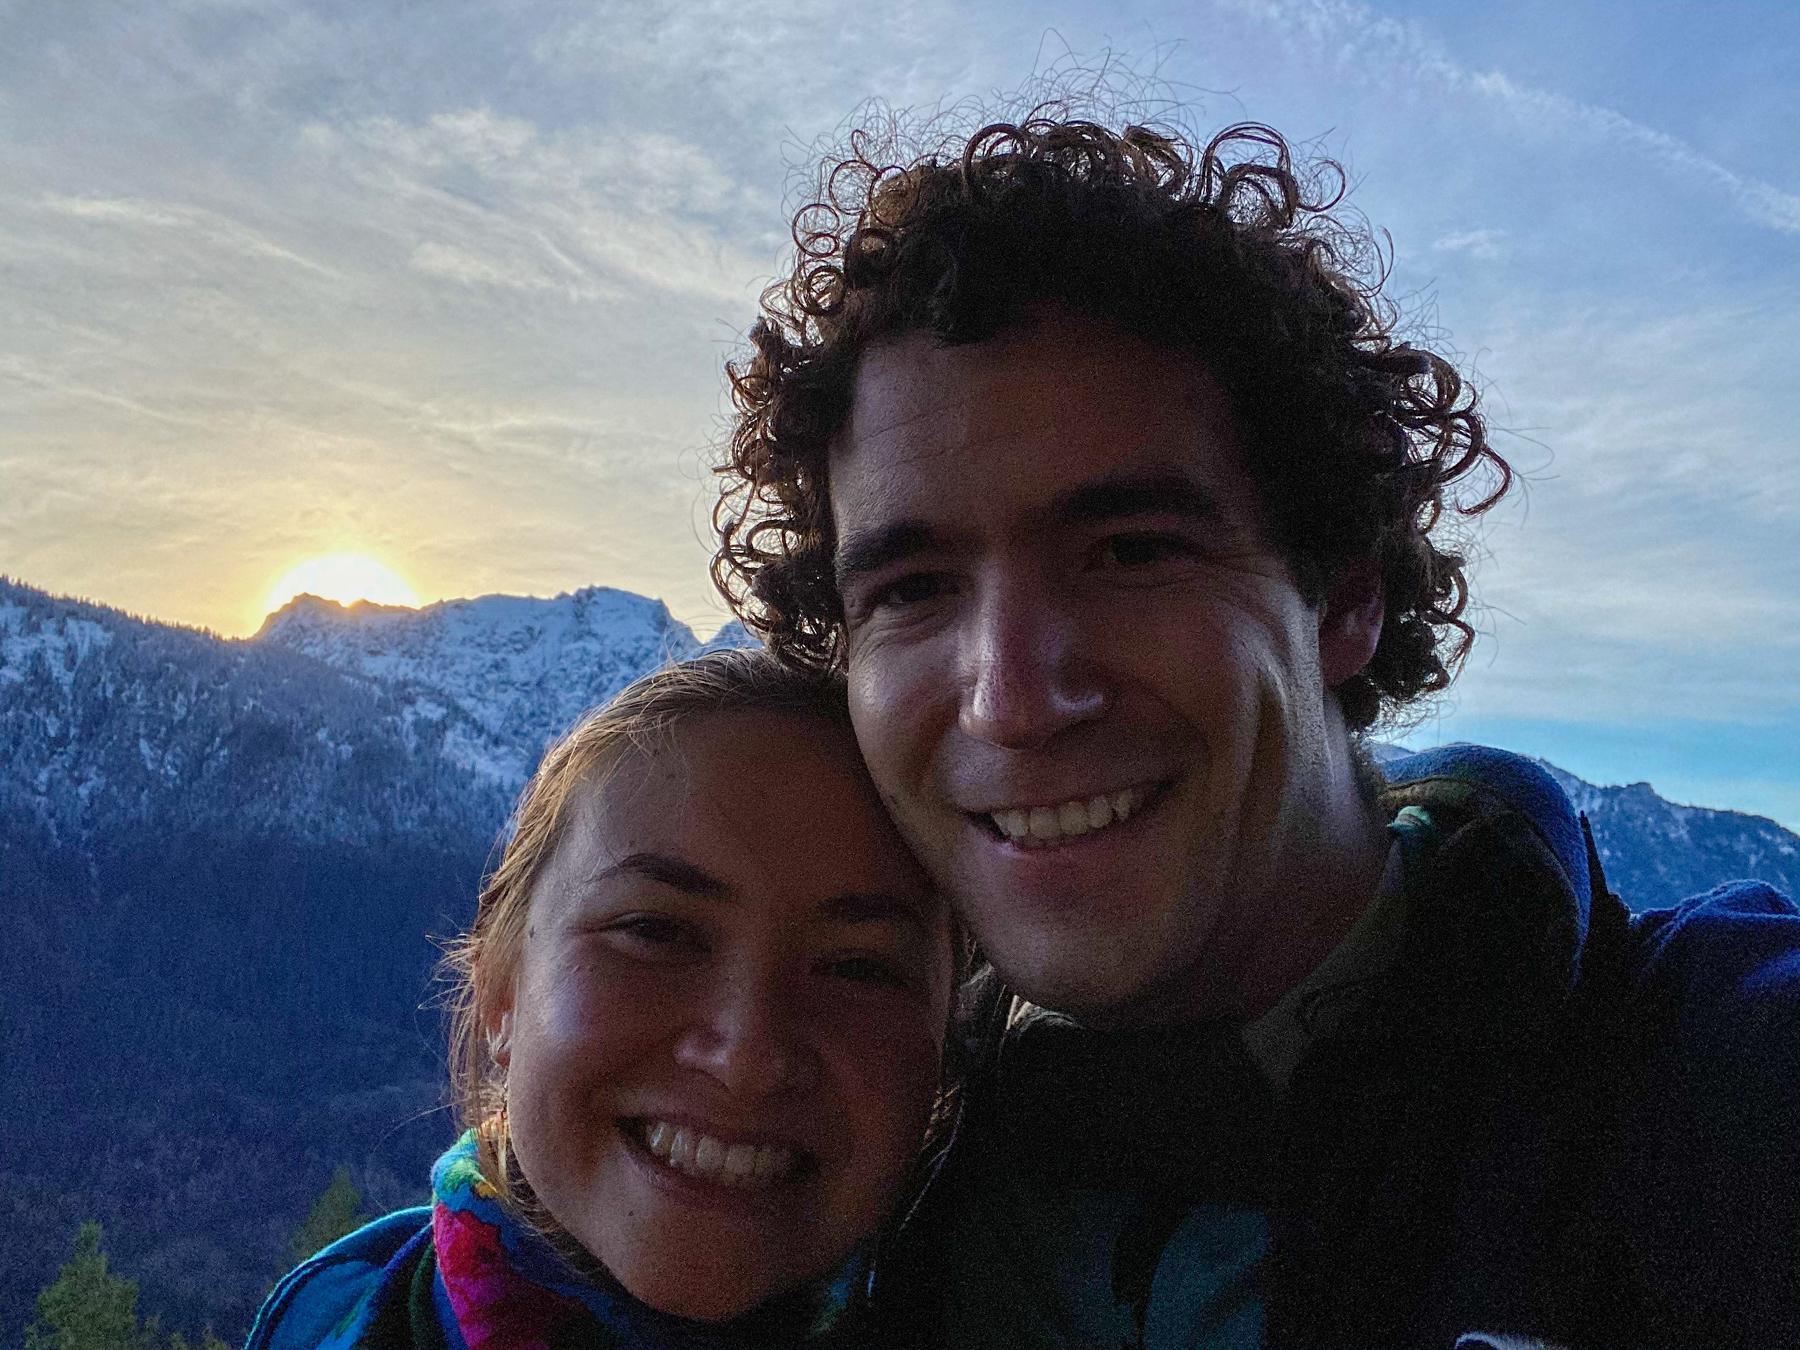 Our first picture together at Heybrook Lookout! - December 2020